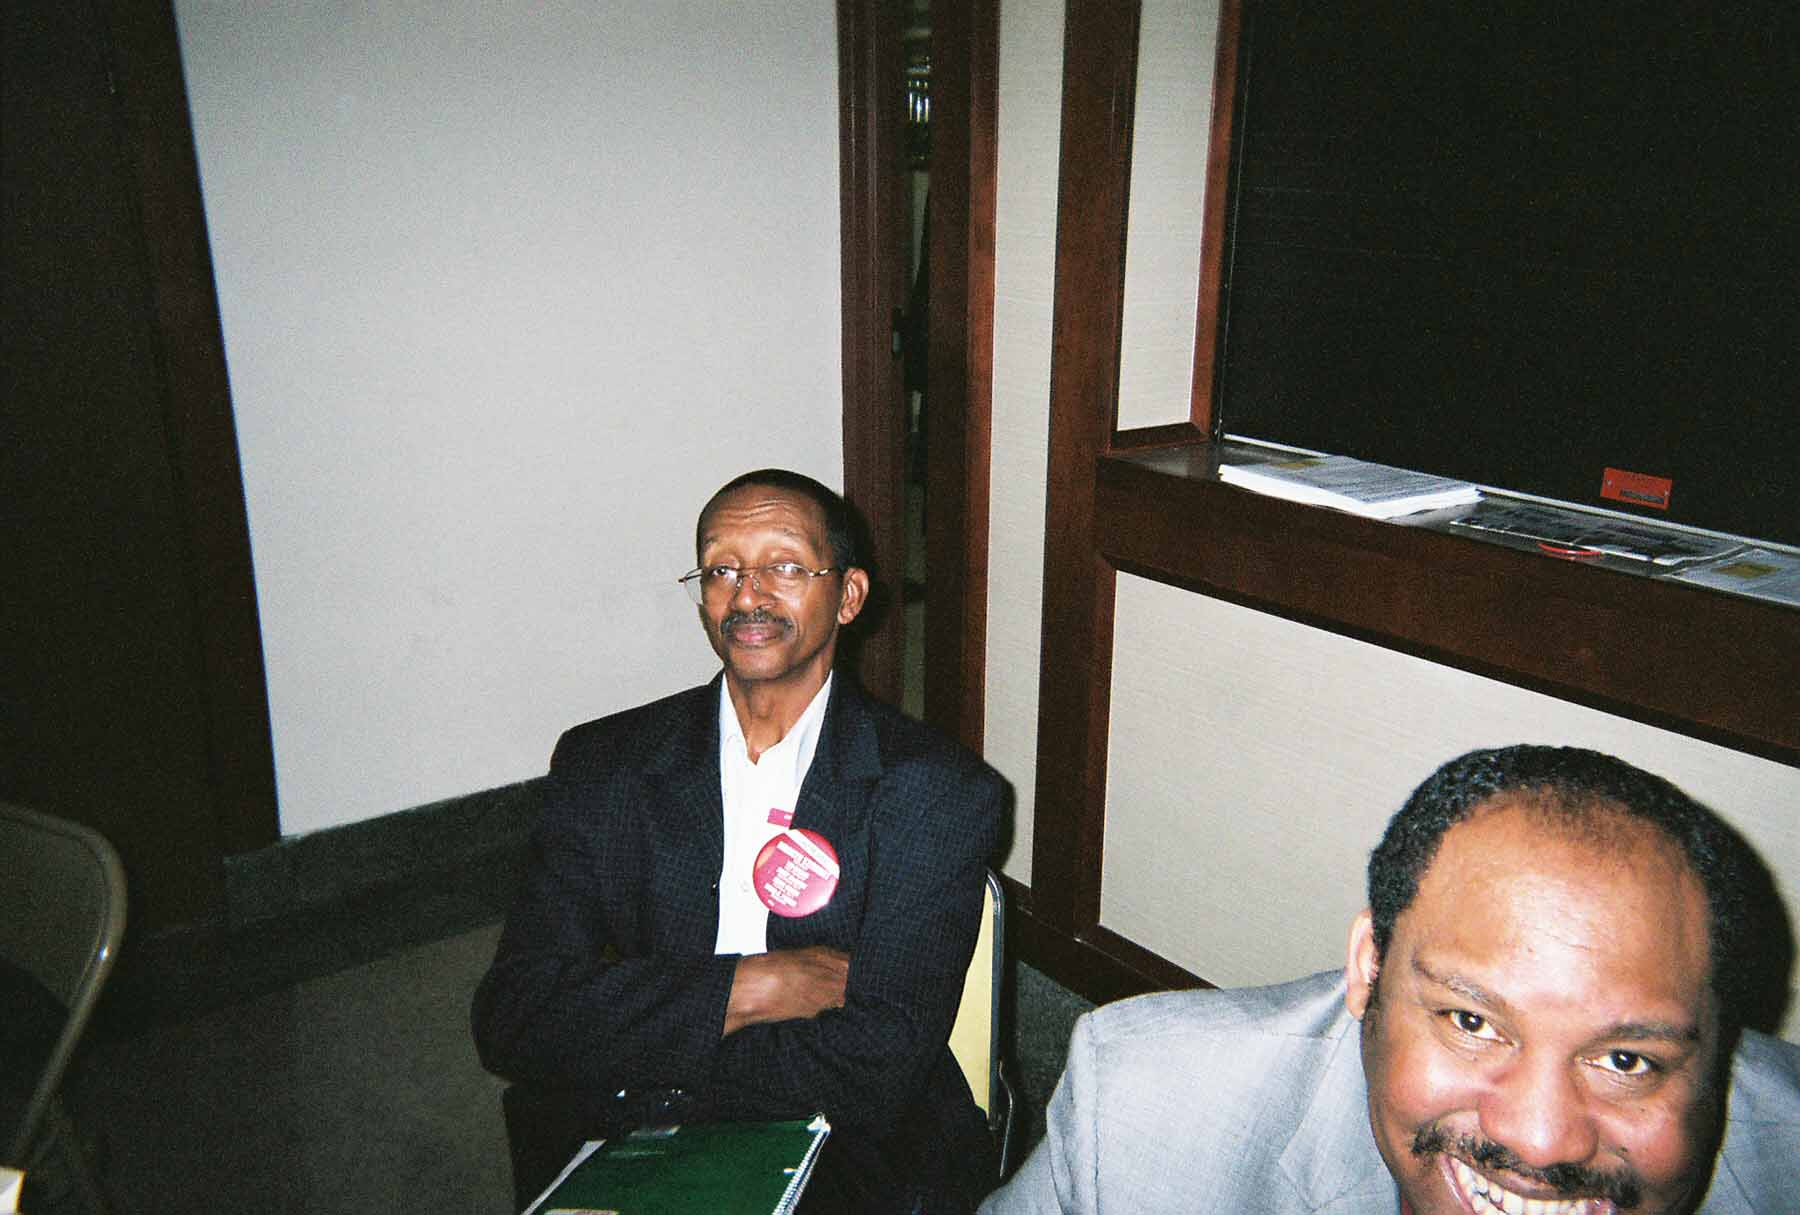 At the May 2007 meeting of the Chicago Teachers Union’s House of Delegates, more than 100 members of the union’s part-time and full-time staff were sitting at credentials tables sporting huge UPC election buttons like the one above. One year later, Stewart’s UPC — posing as the leadership of the Chicago Teachers Union — has accused CTU Vice President Ted Dallas of using the union for partisan political activity — something Stewart encouraged exactly one year earlier when the CTU election was still looming. At the sign-in tables for the May 2007 union meeting and around the union hall, Substance counted more than 100 union staff (including district supervisors, above) wearing partisan buttons supporting Stewart and her slate. Substance photograph by George N. Schmidt.